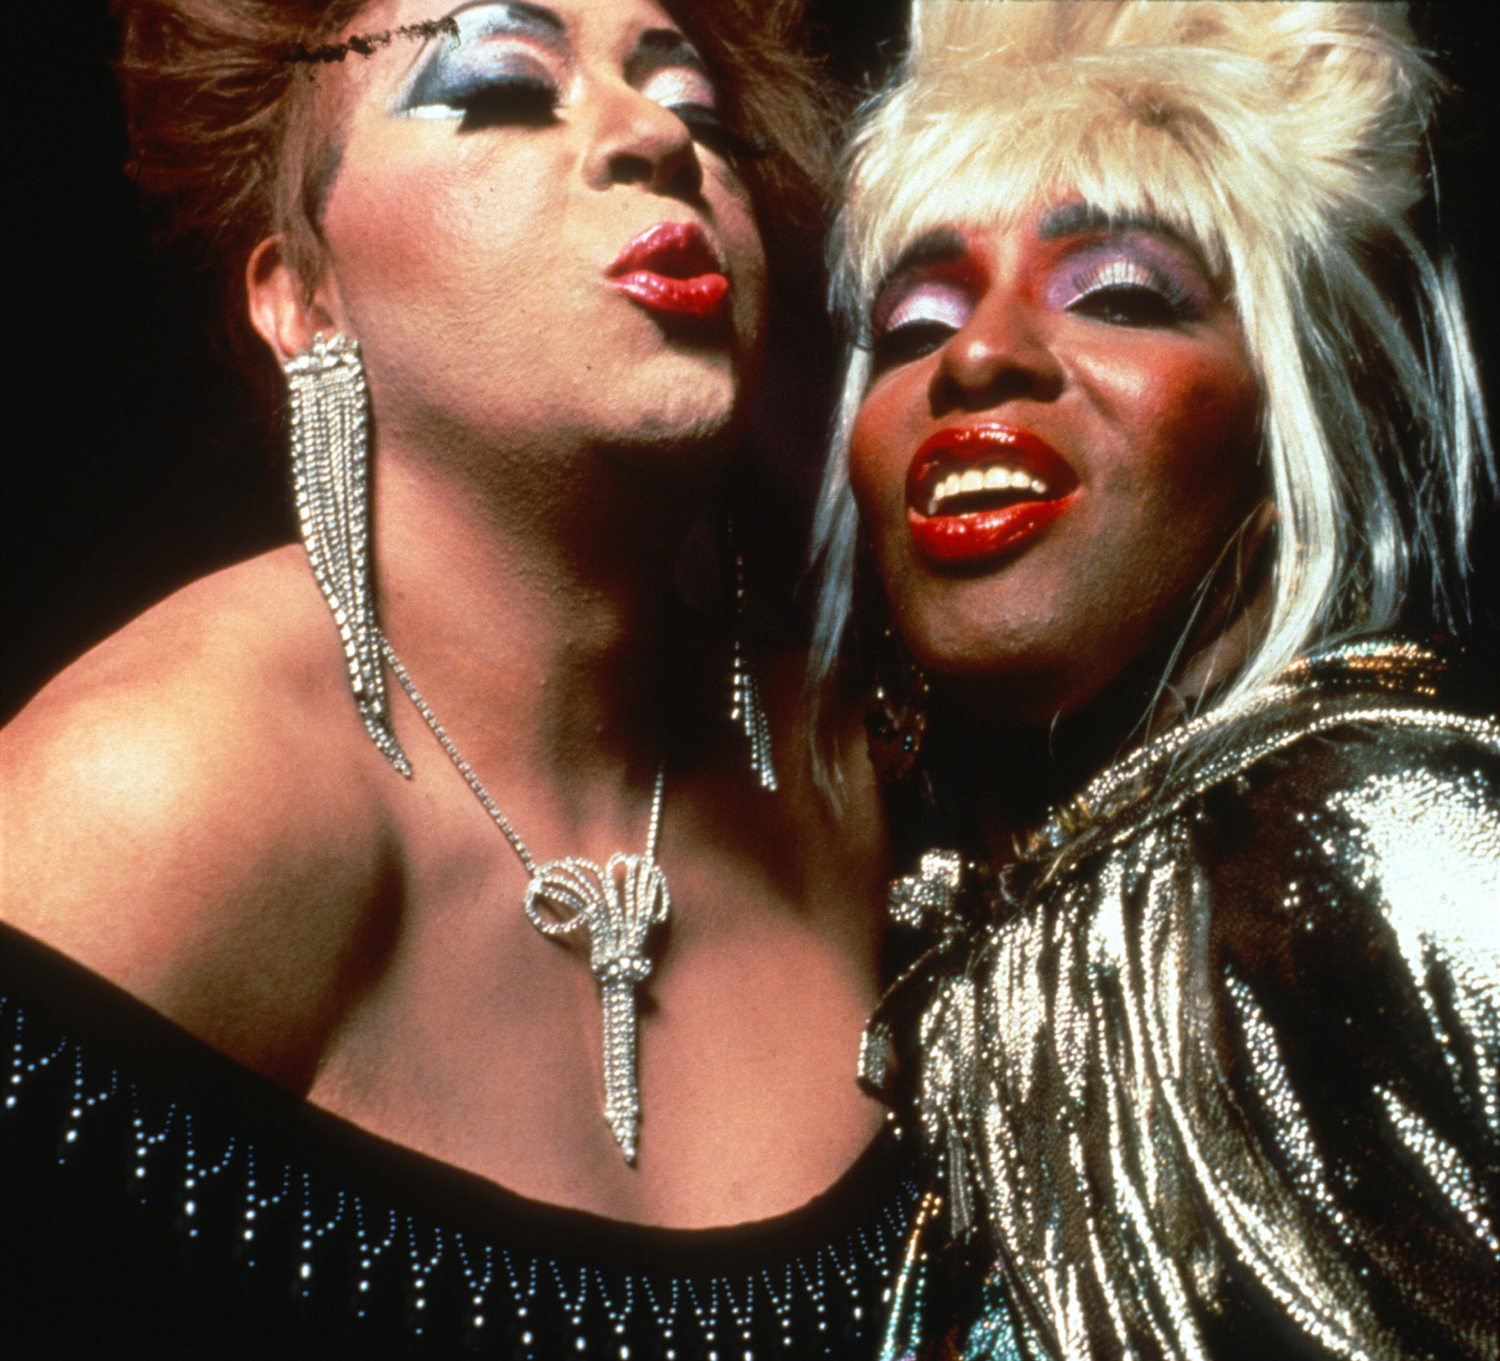 A close up photo of two ball performers from Paris is Burning, smiling and kissing towards the camera.